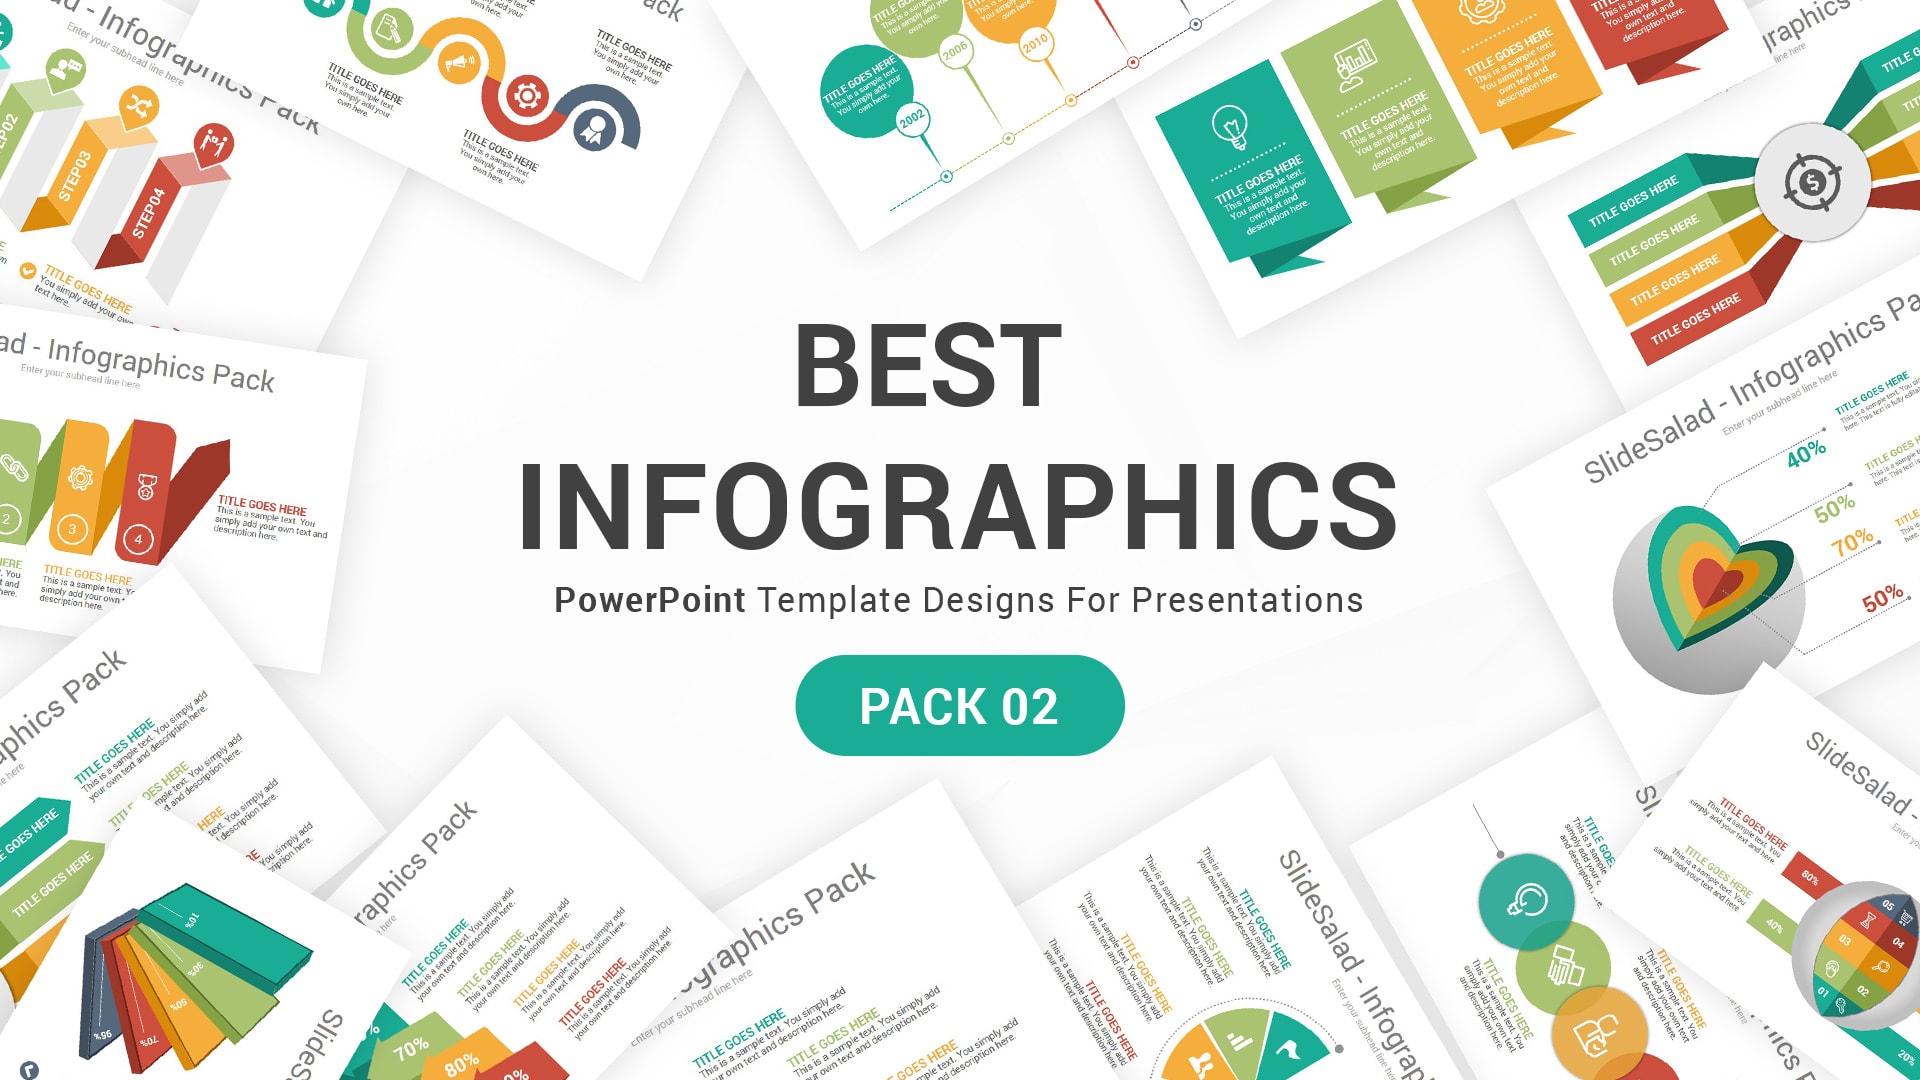 Infographics-Designs-Pack-Best-Multipurpose-PowerPoint-Templates-for-Corporate-Presentation